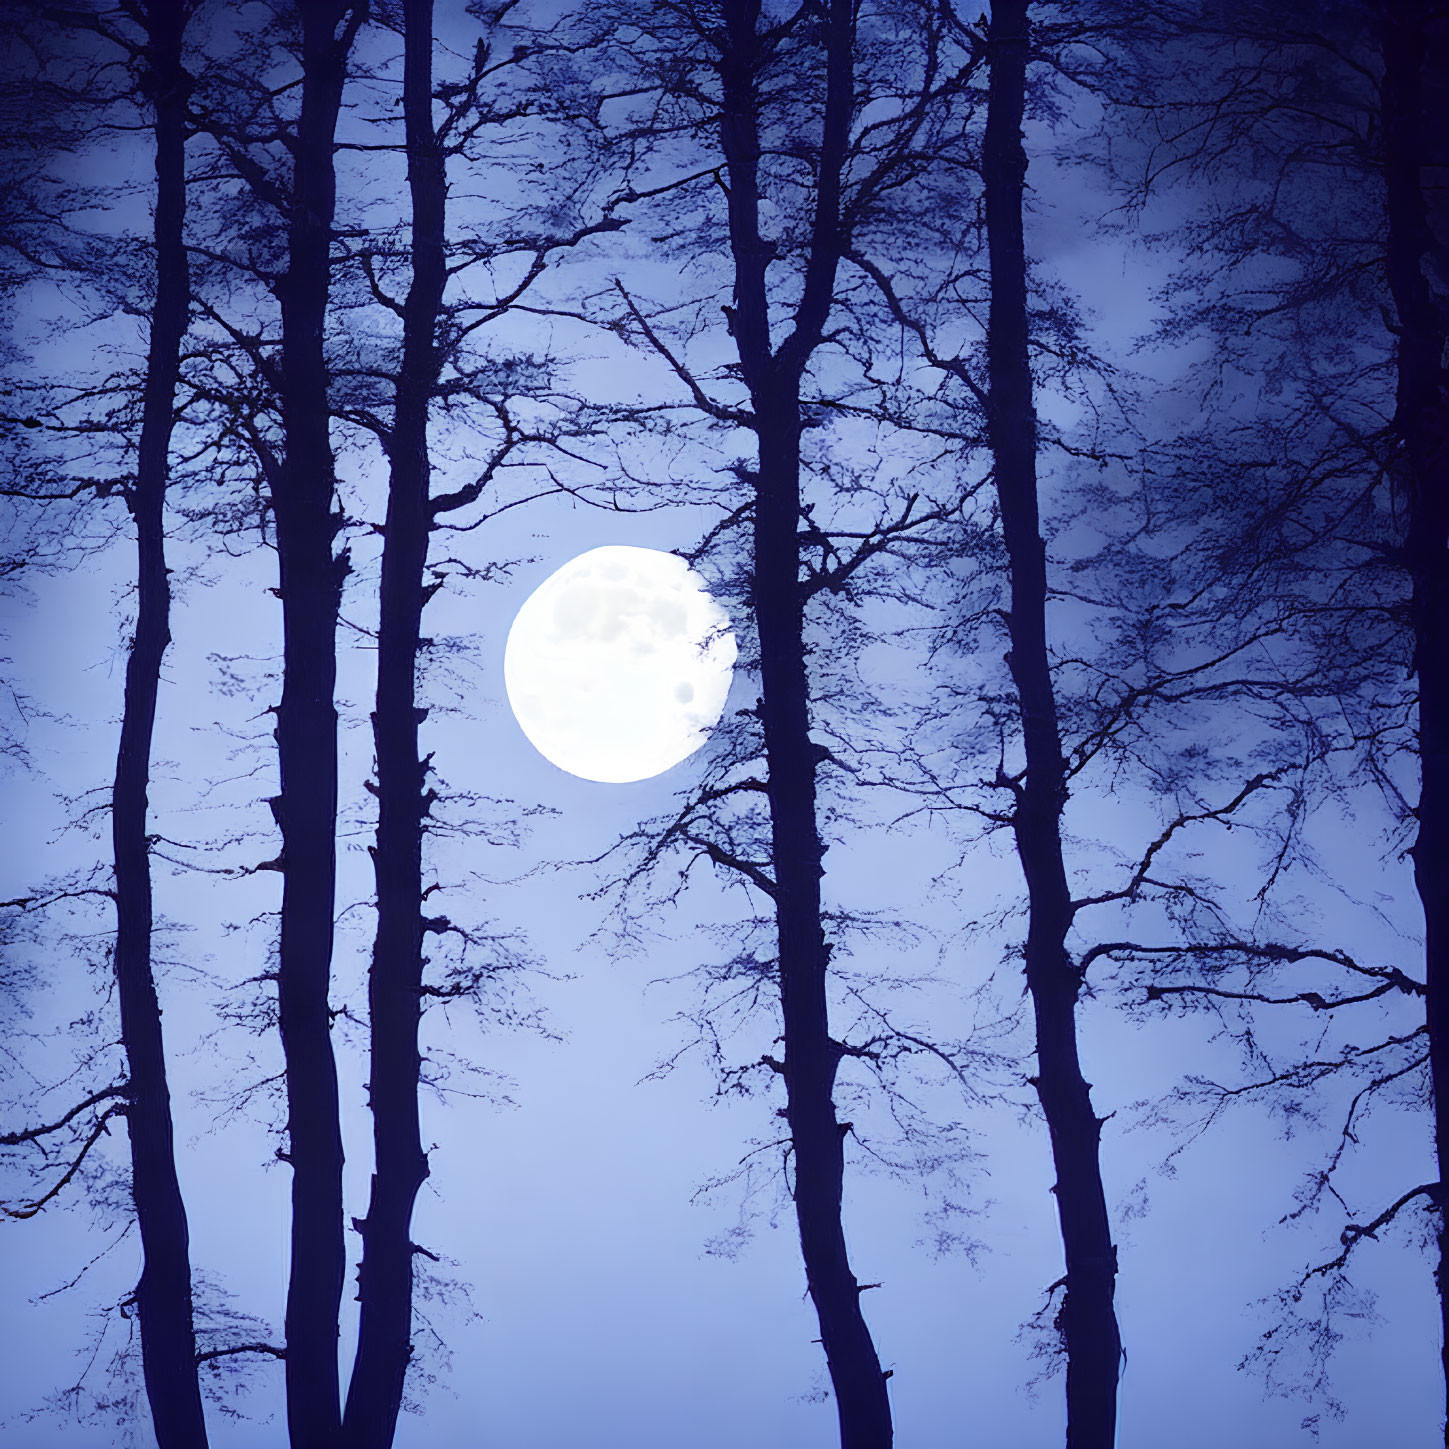 Full Moon Silhouetted Behind Bare Trees in Dusky Night Sky